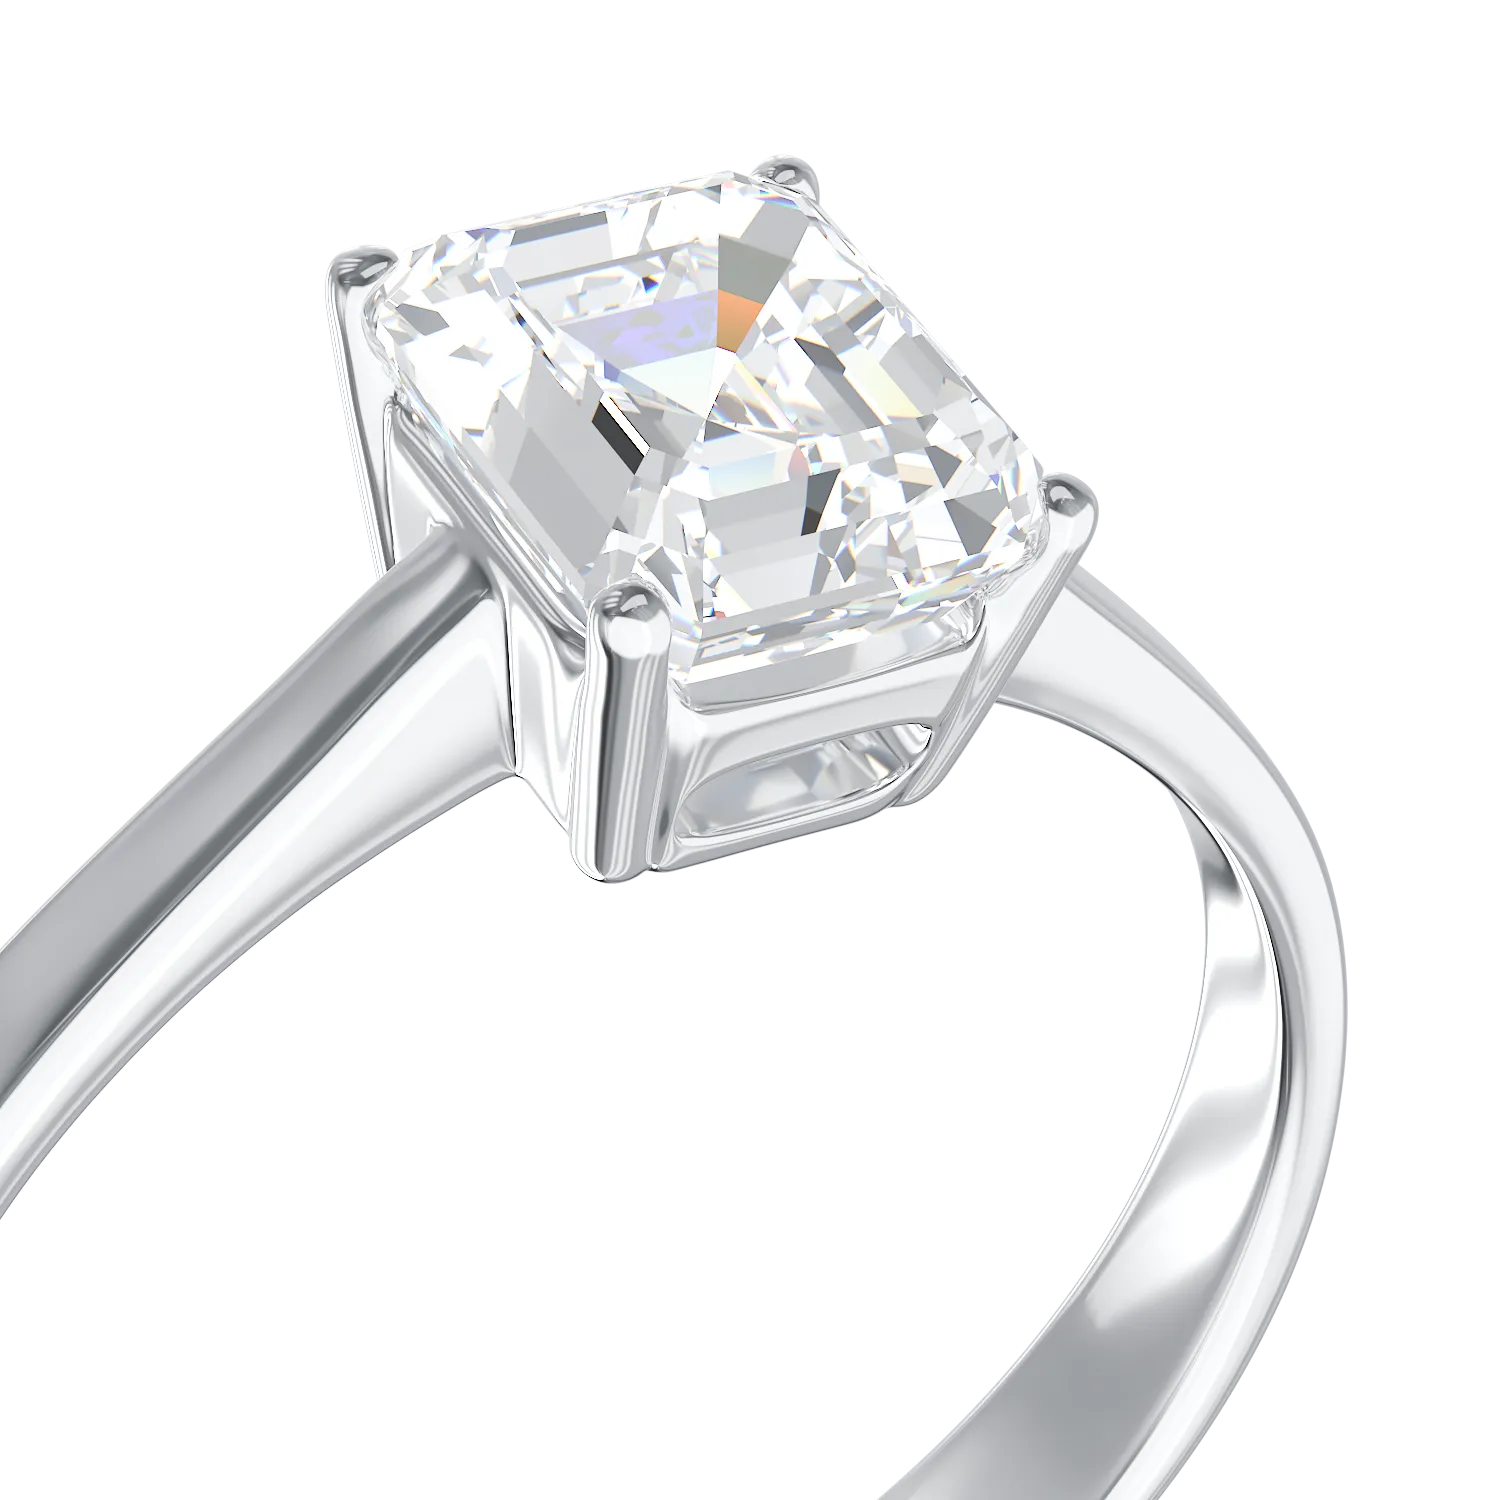 18K white gold engagement ring with a 1.11ct solitaire diamond